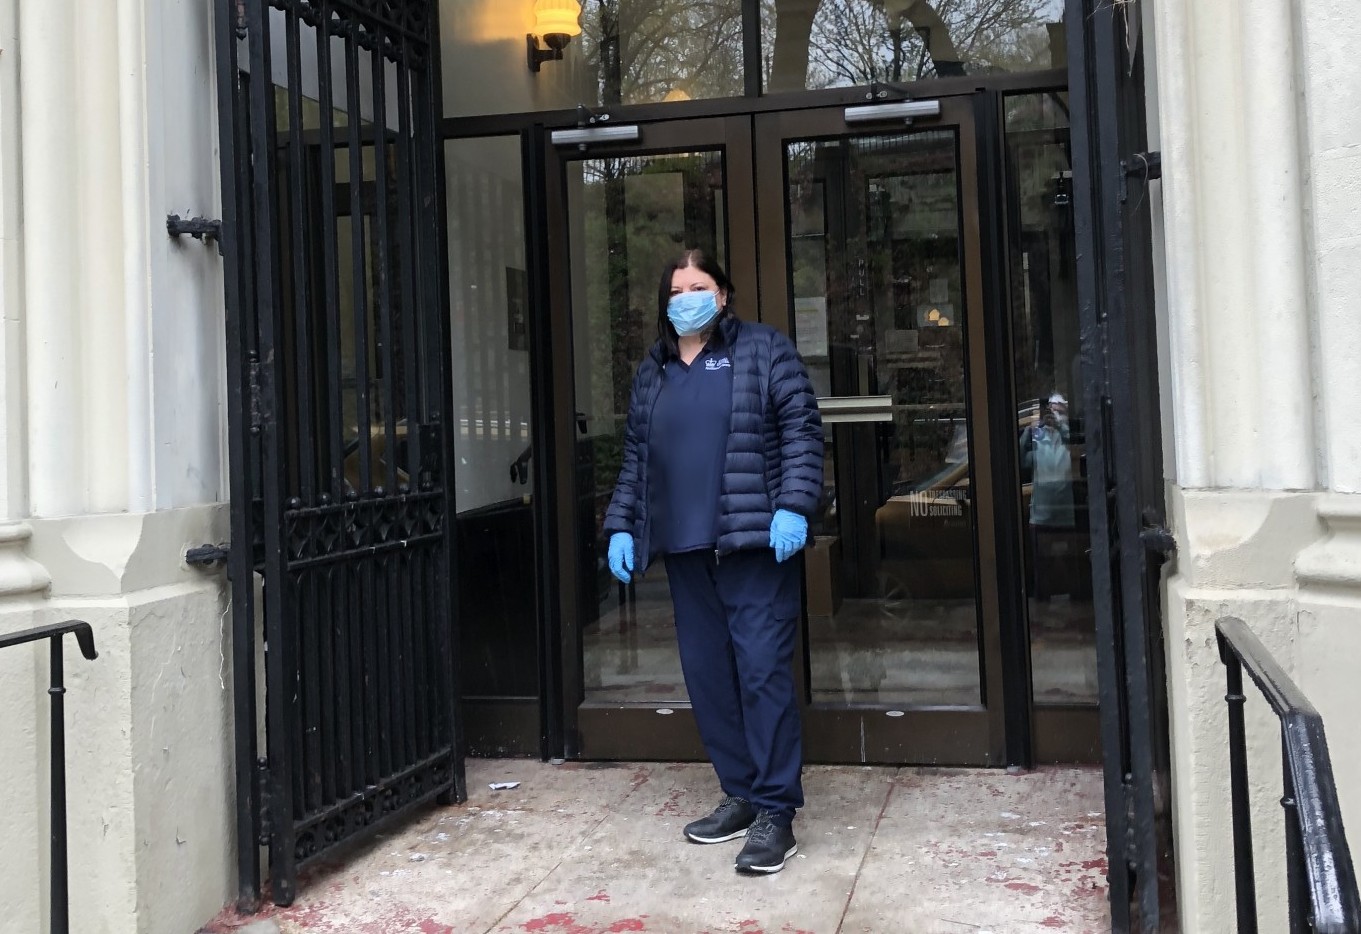 Residential staff wearing mask, standing in front of building